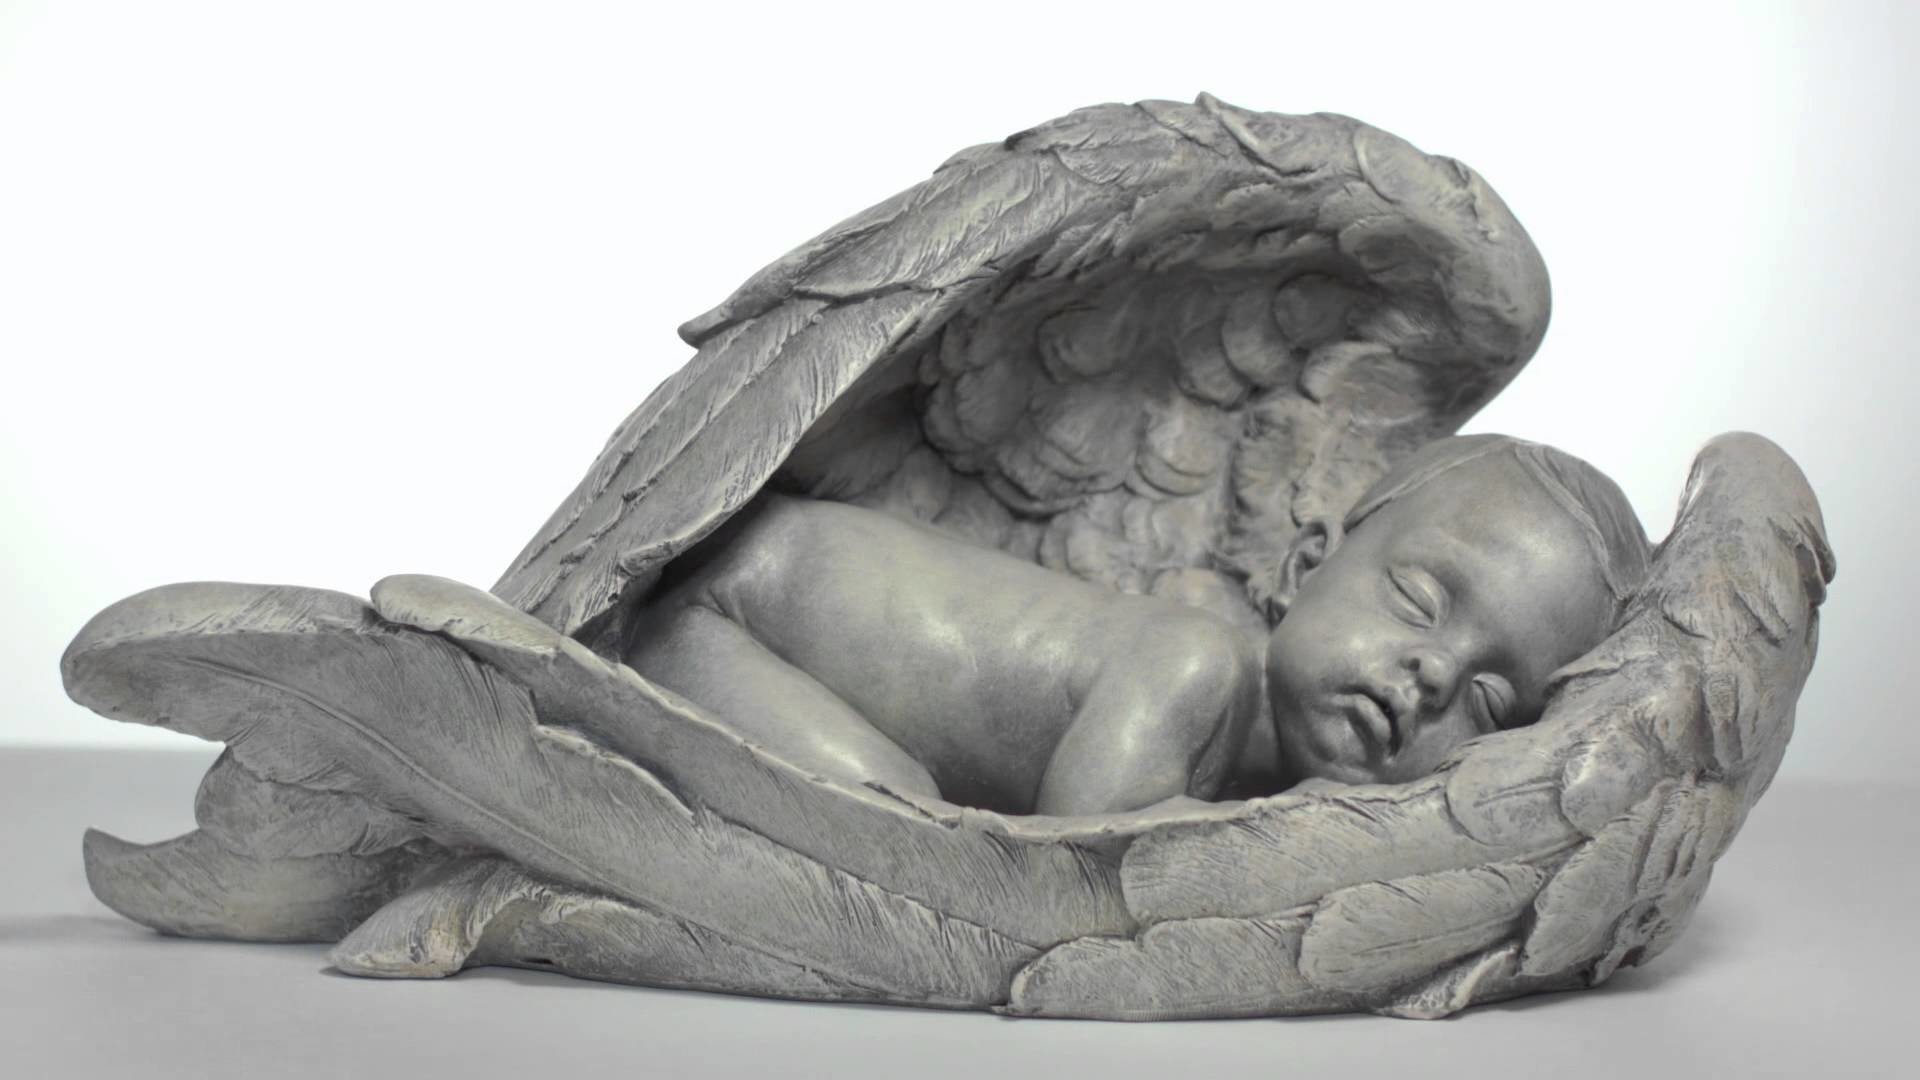 1920x1080 baby angel statues - Google Search